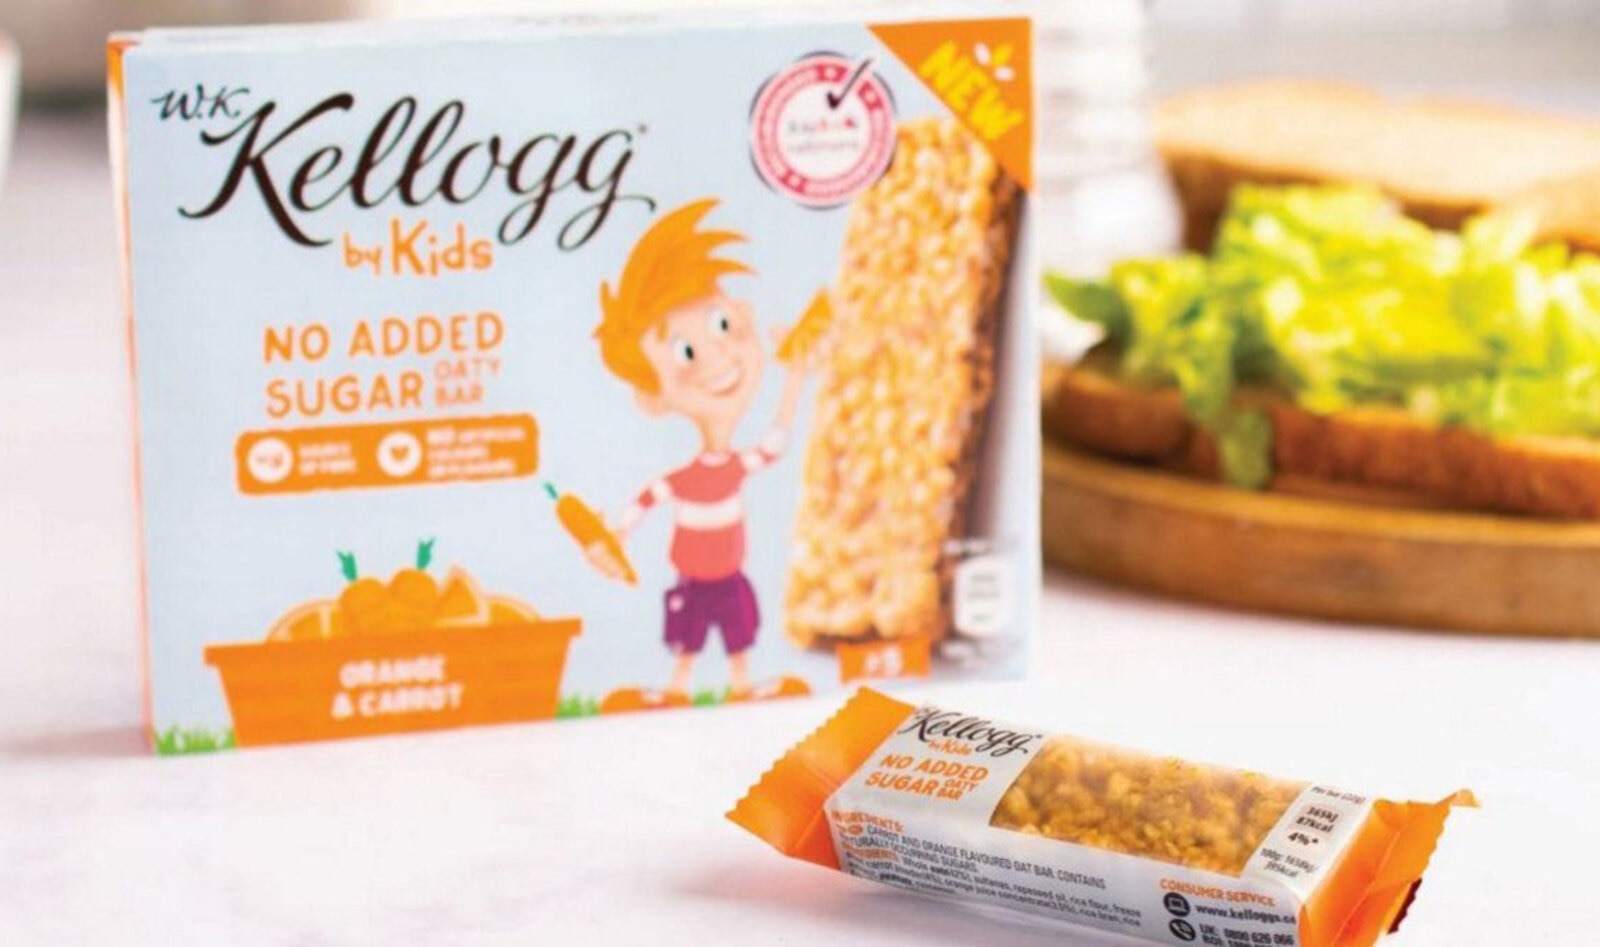 Kellogg’s New Vegan Snacks Are Made for Kids by Kids